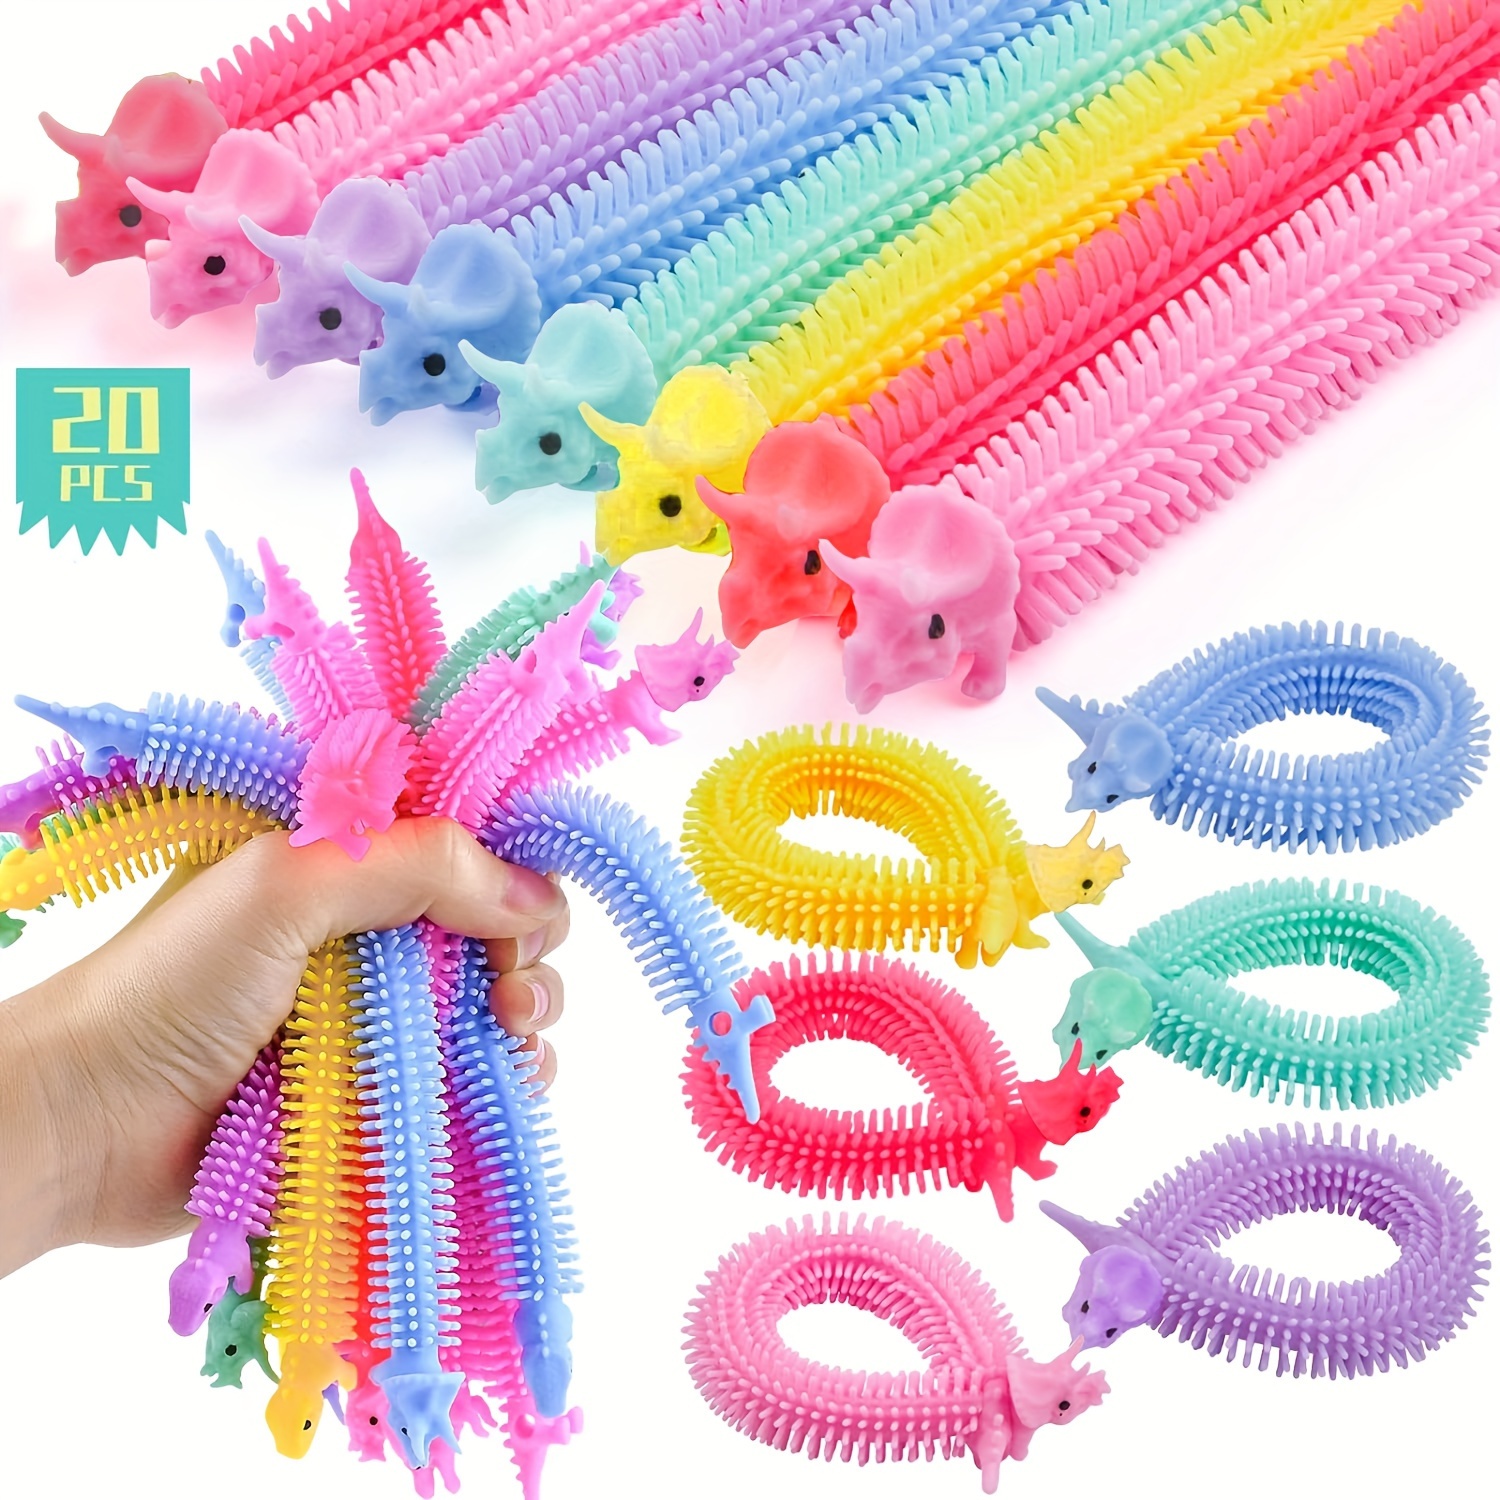 

20pcs Stretchy Strings Fidget Toys, Colorful Sensory Worm Fidget Stretchy Toys, Relief Relaxing Anxiety Stress Party Favors Gifts Christmas Stocking Stuffers Relaxing Party Favors Dinosaur Gifts